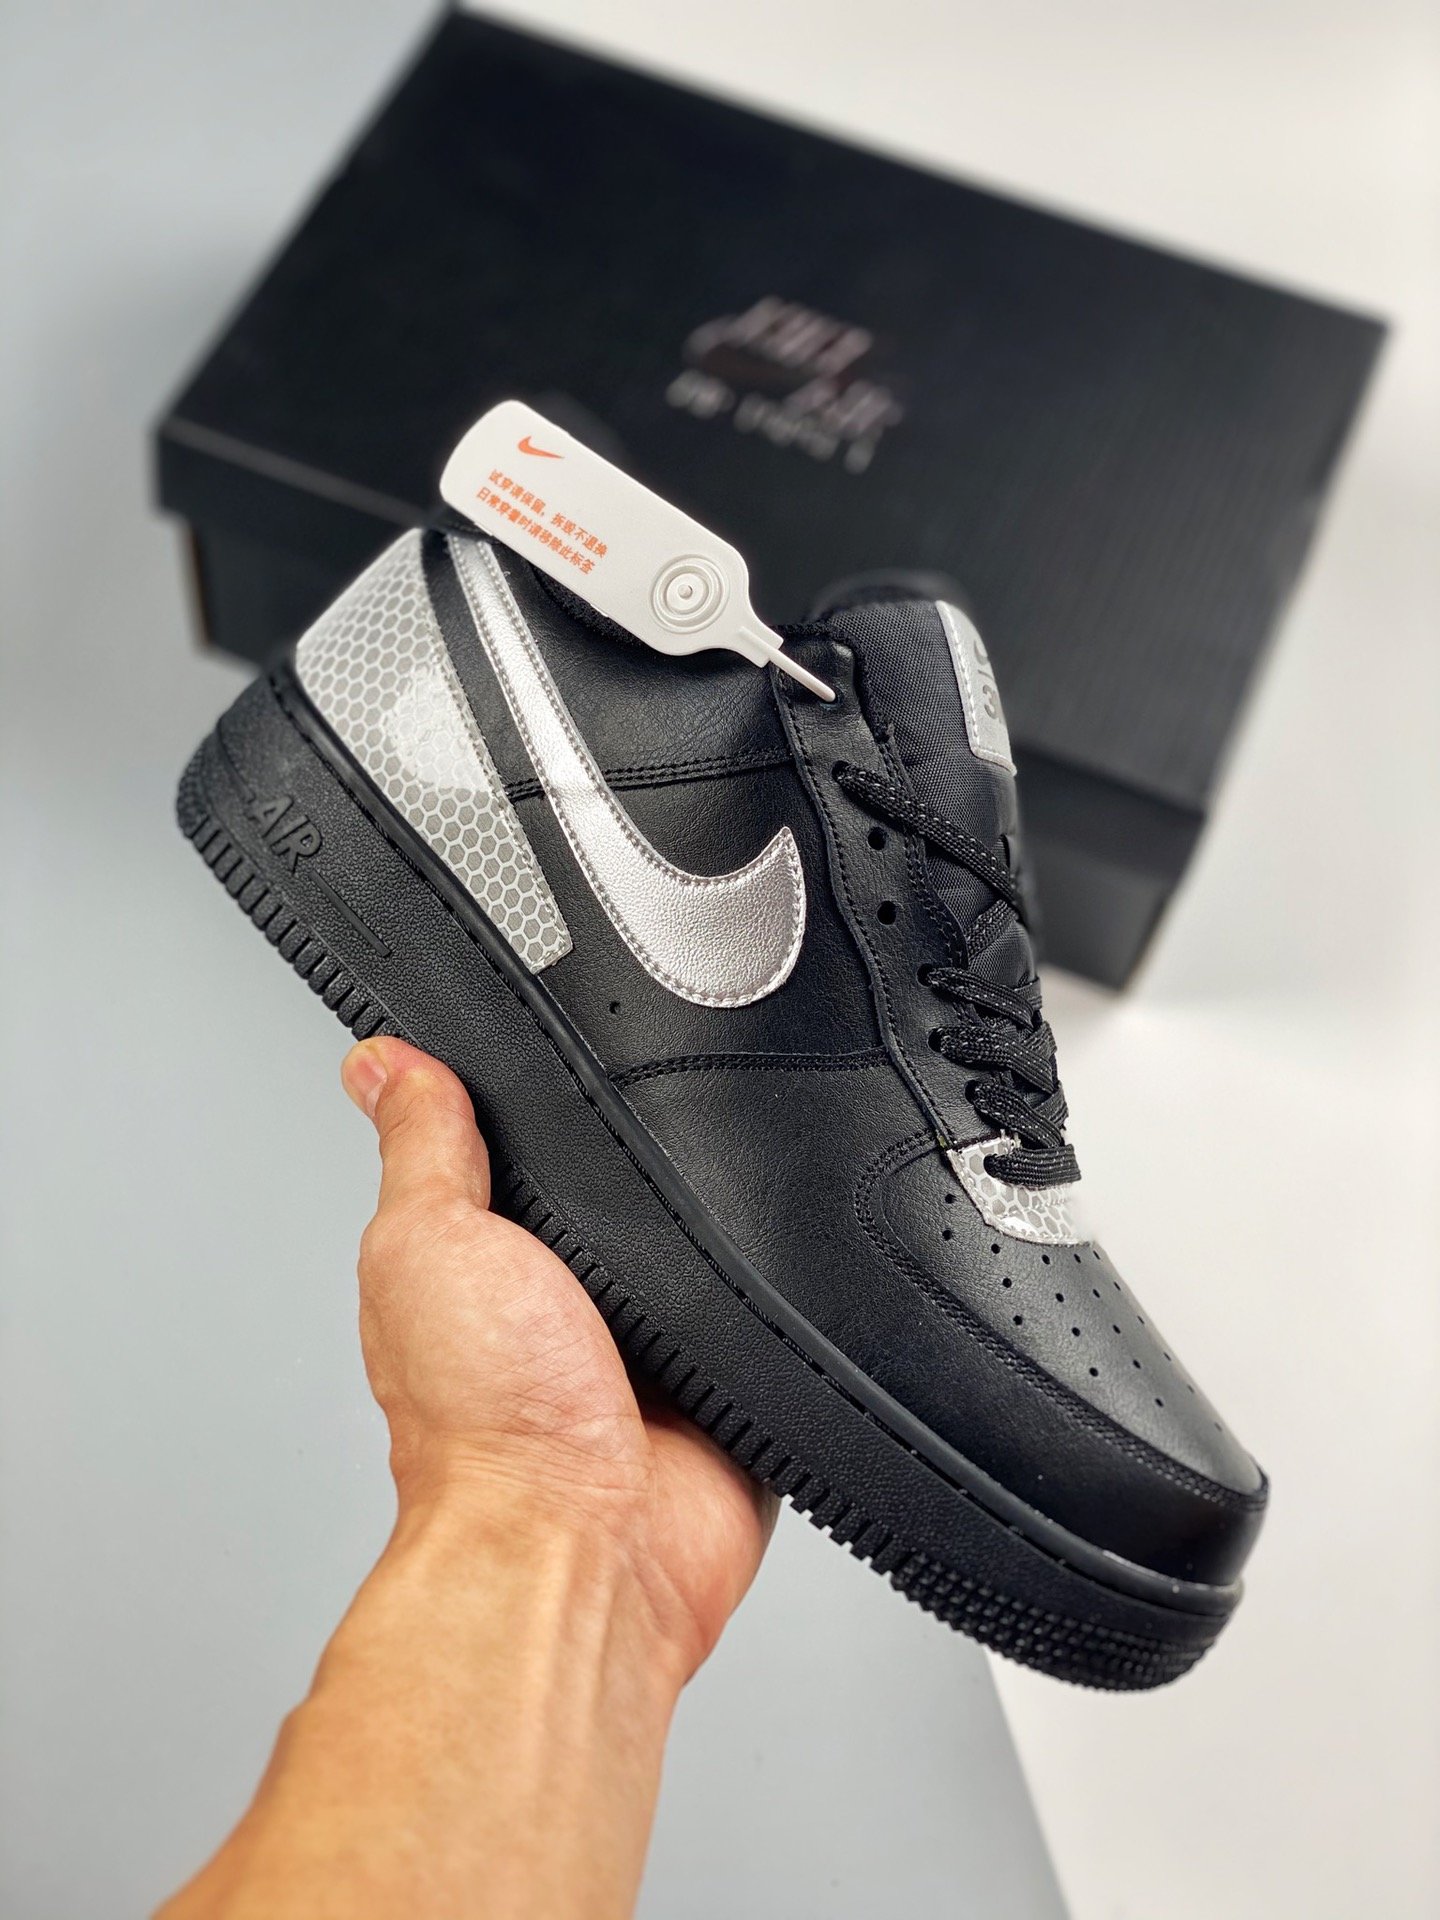 3M x Nike Air AF Force 1 Black Silver CT2299-001 Shoes